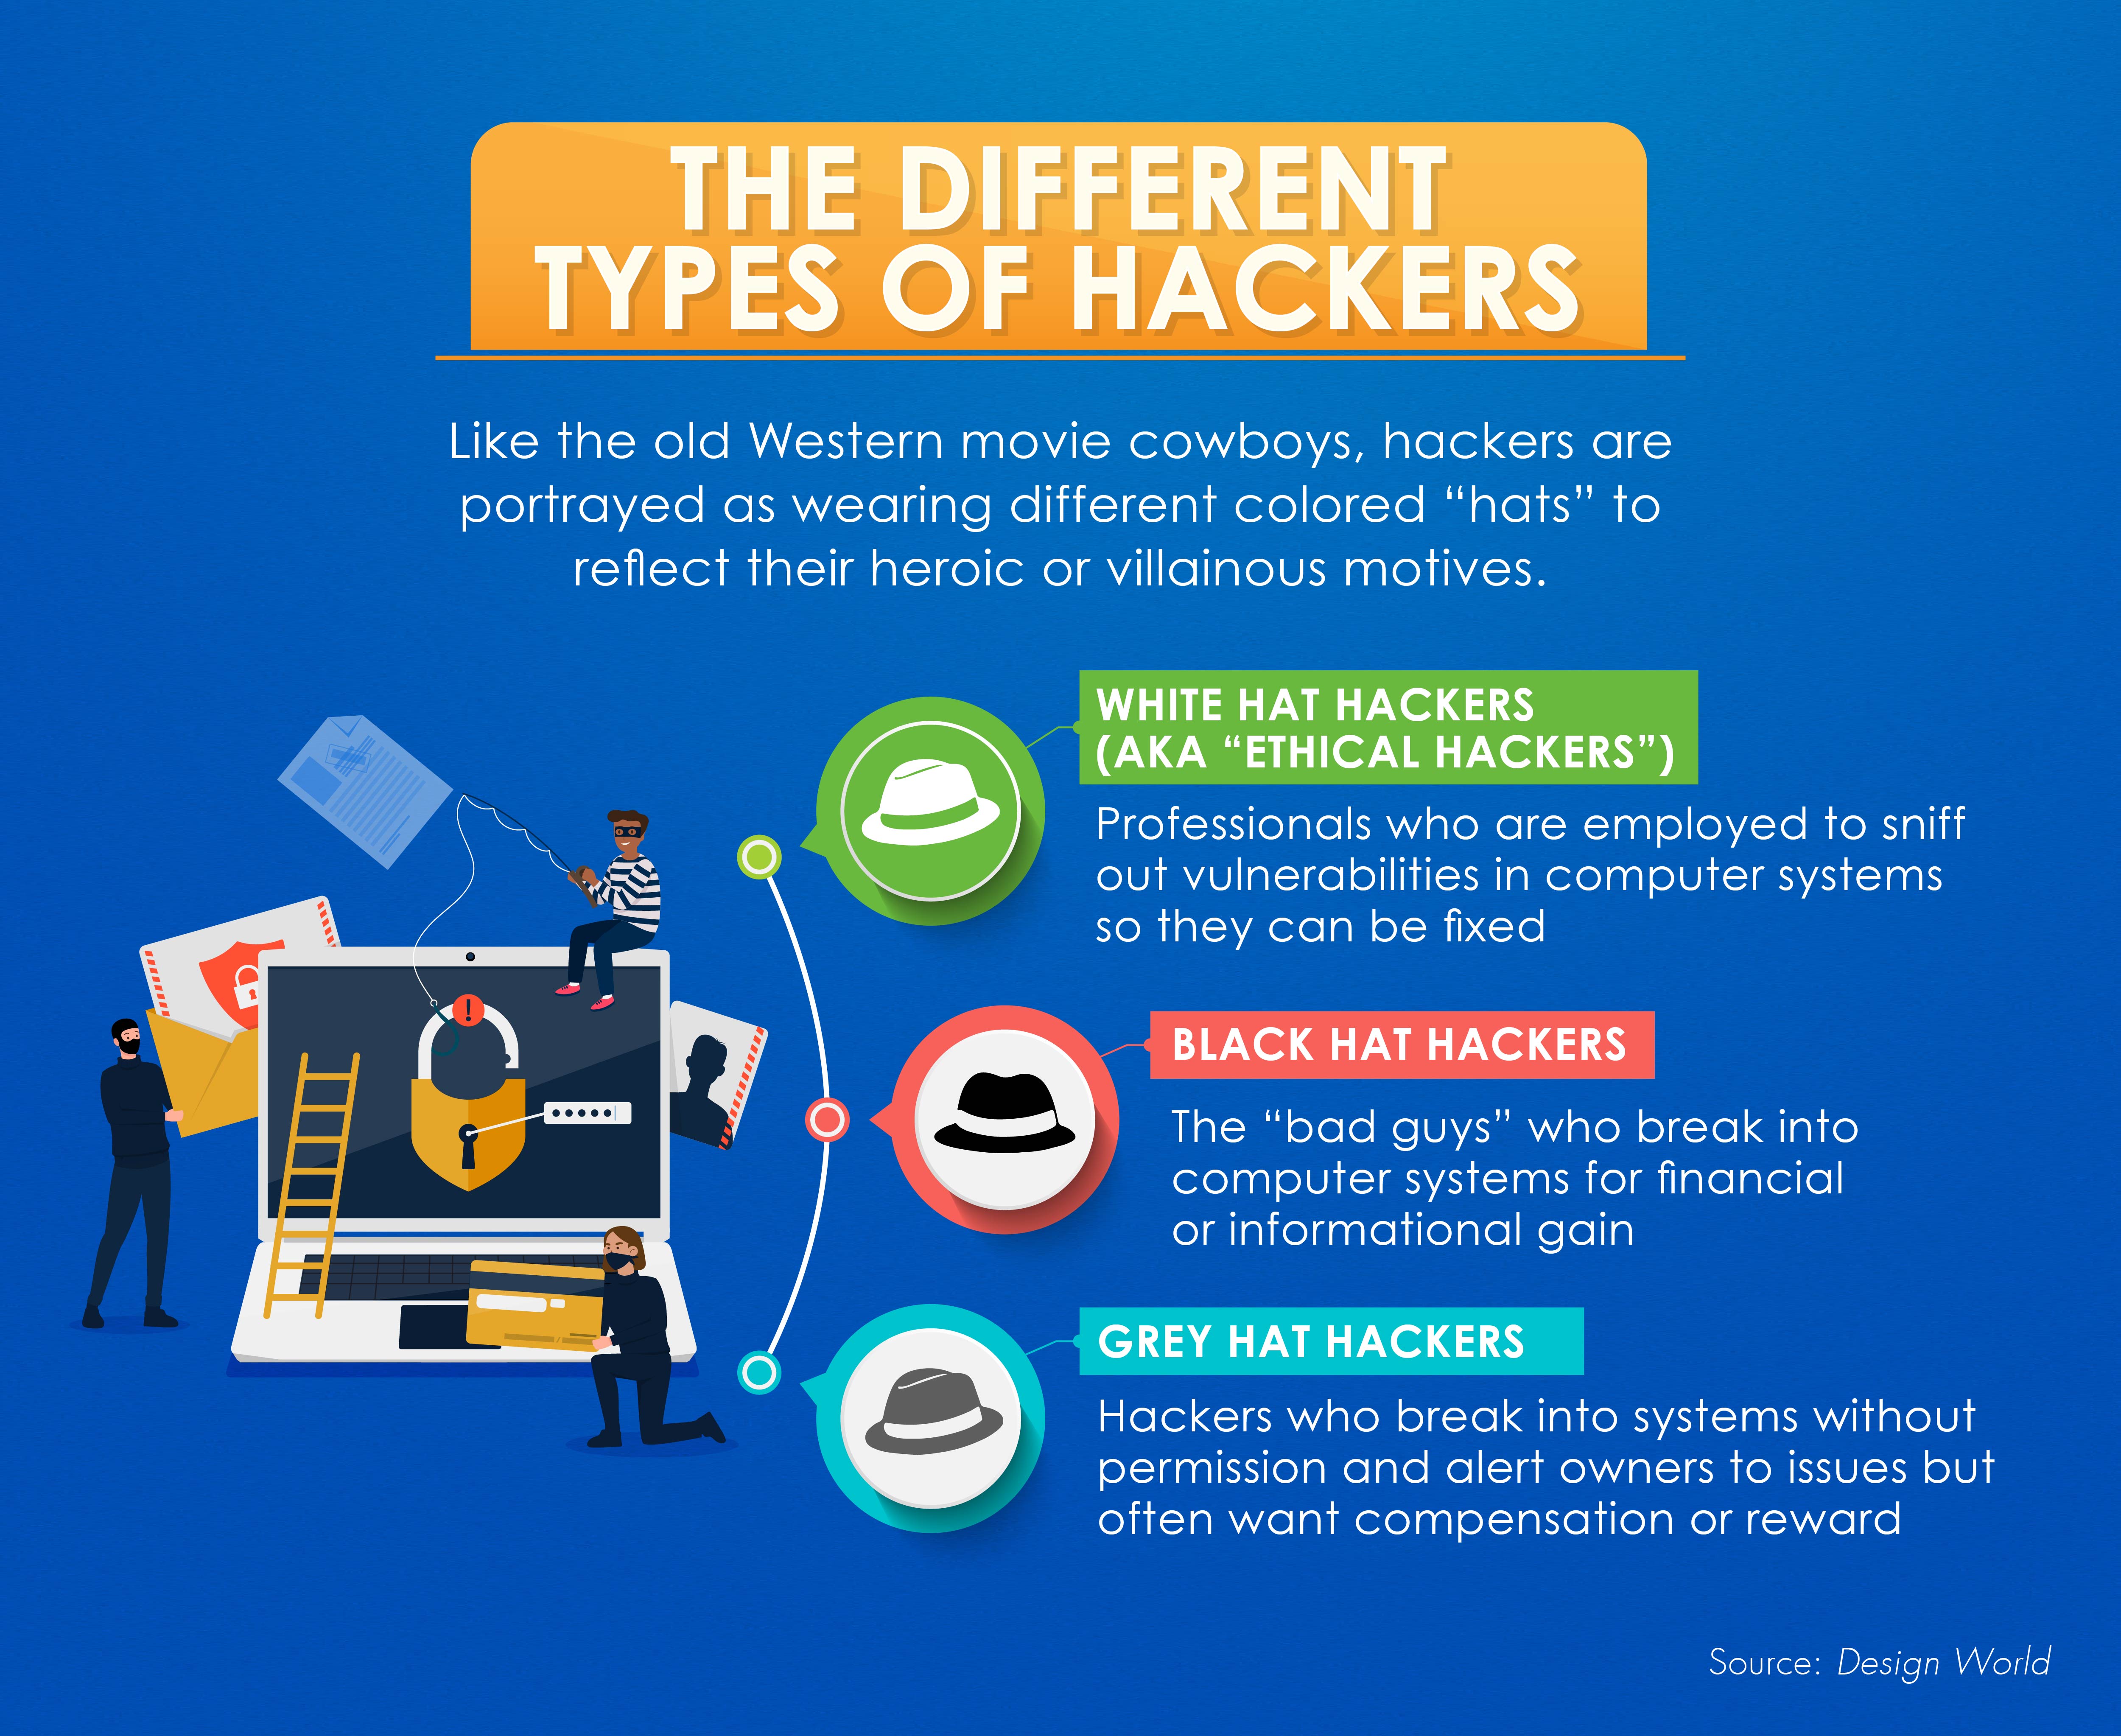 4 Ways to Make It Look Like You Are Hacking